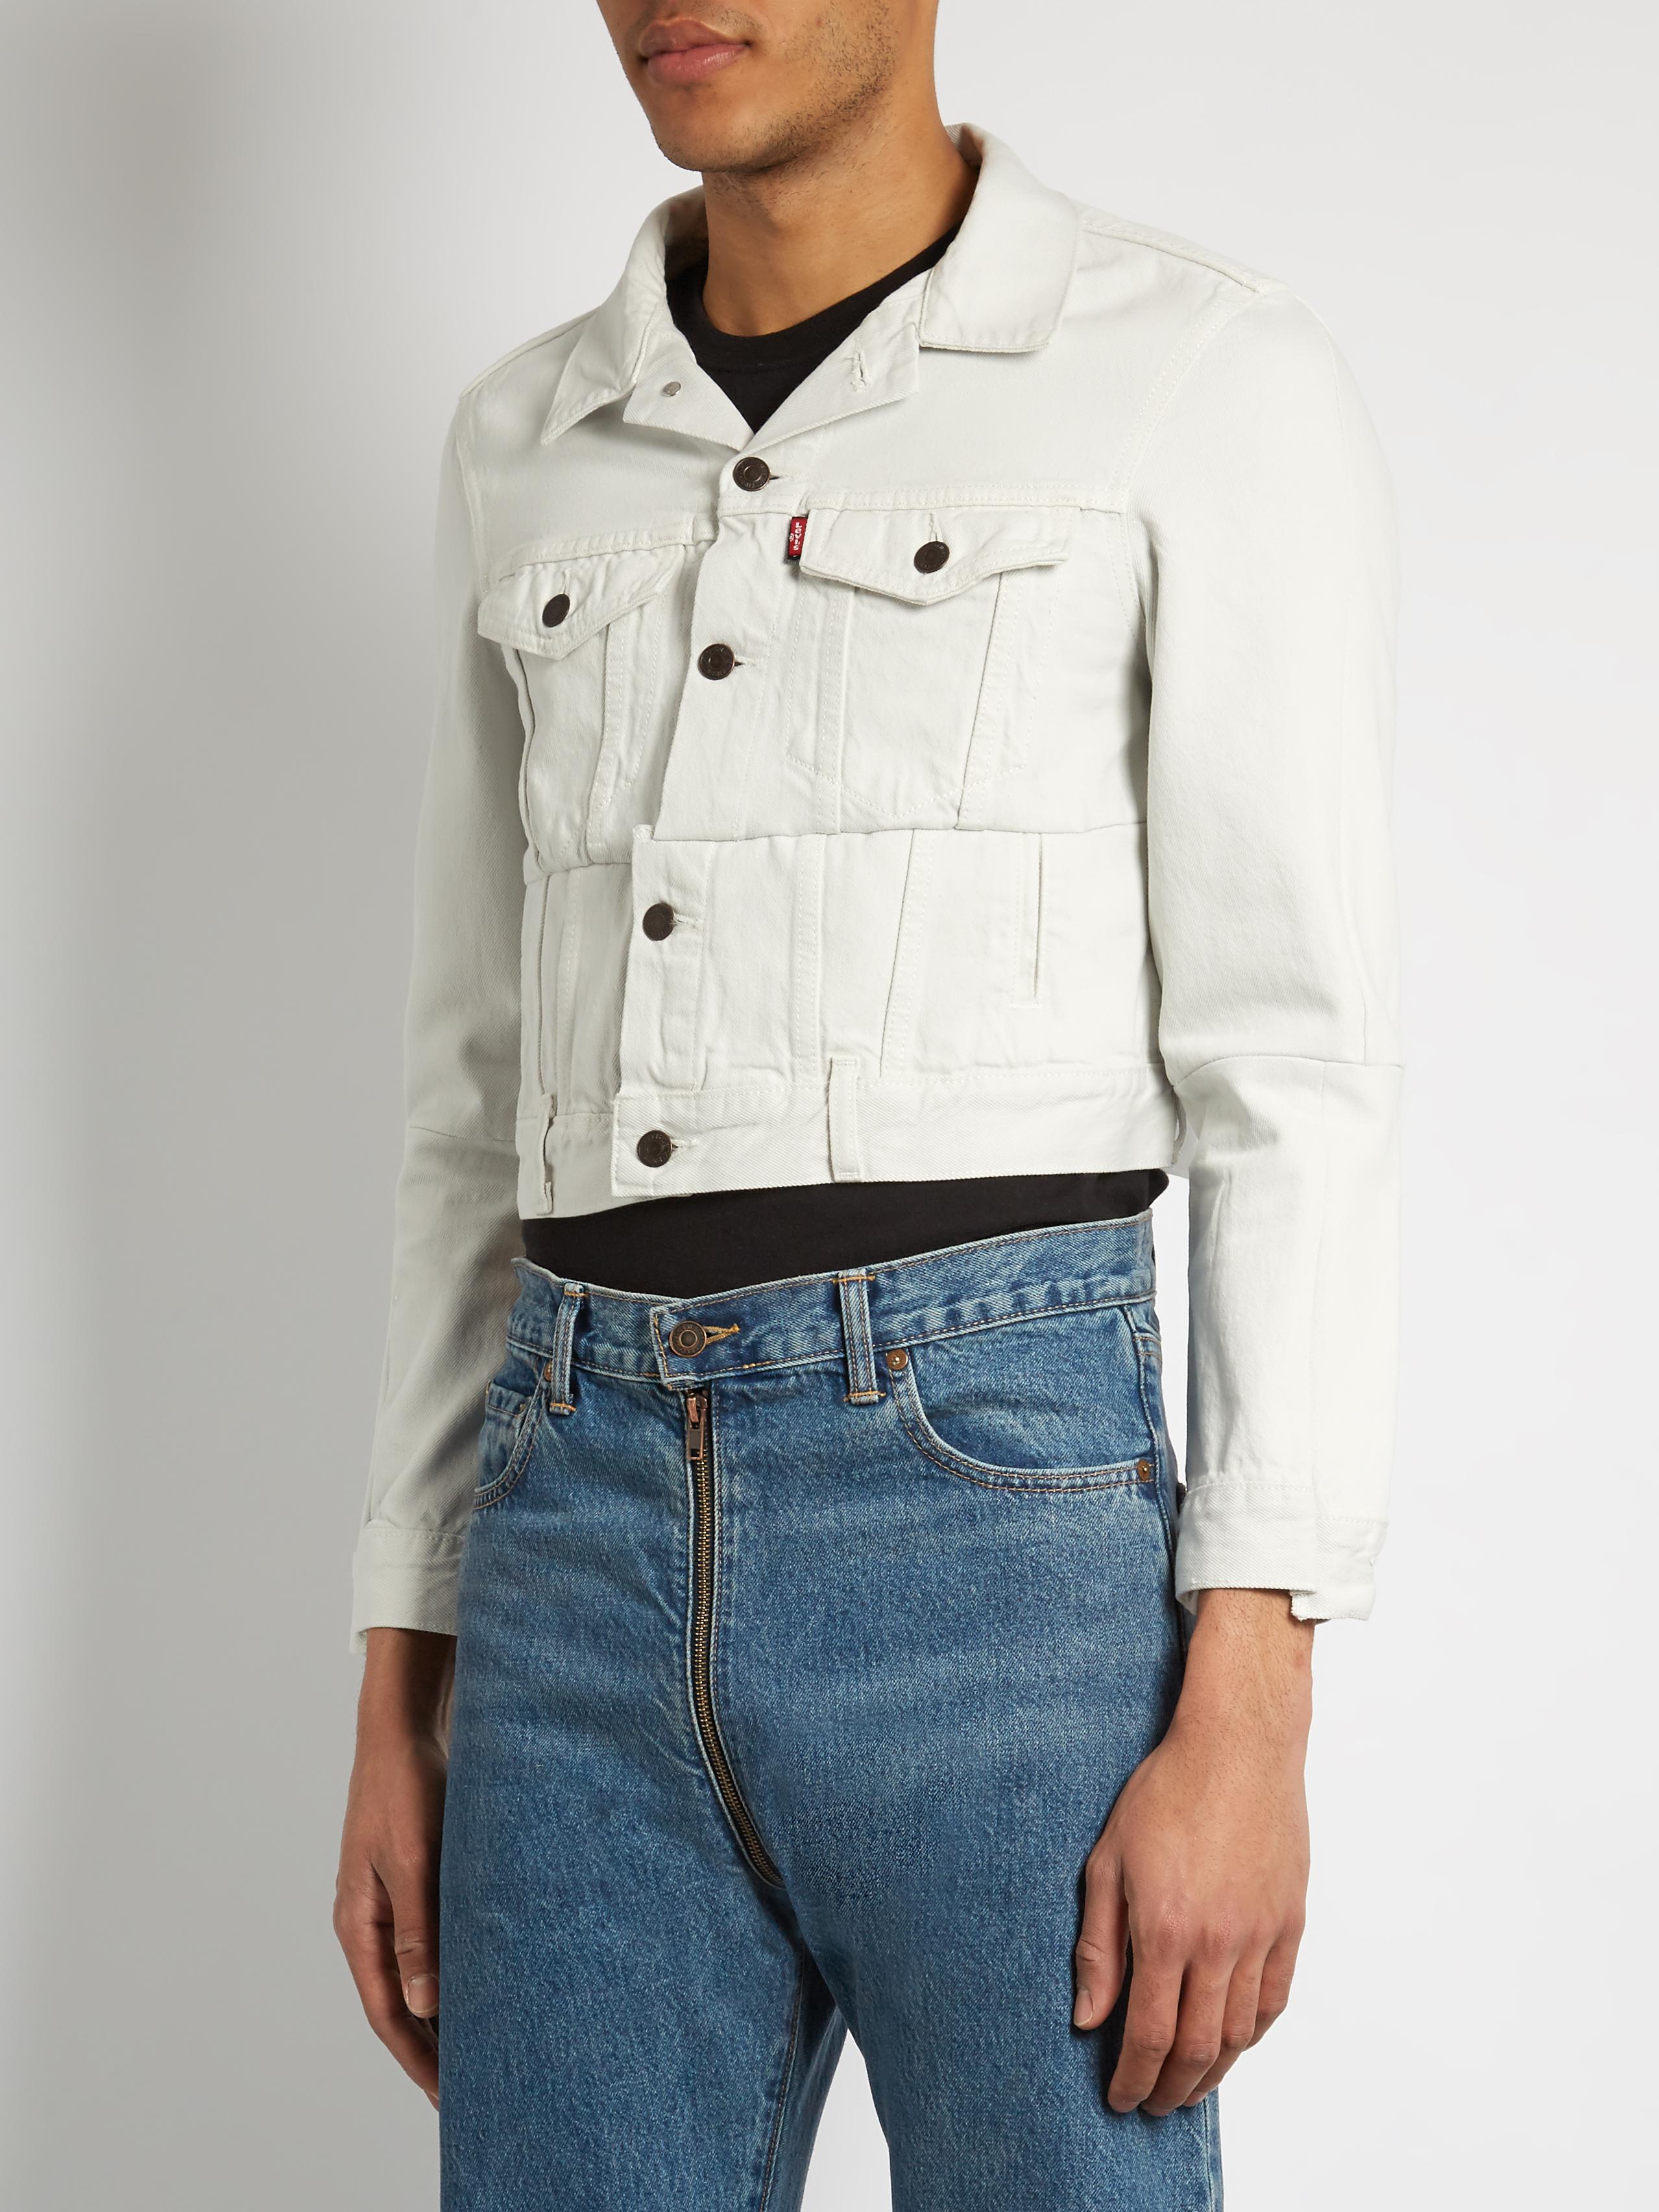 Lyst - Vetements X Levi's Reworked Cropped Denim Jacket in White for Men